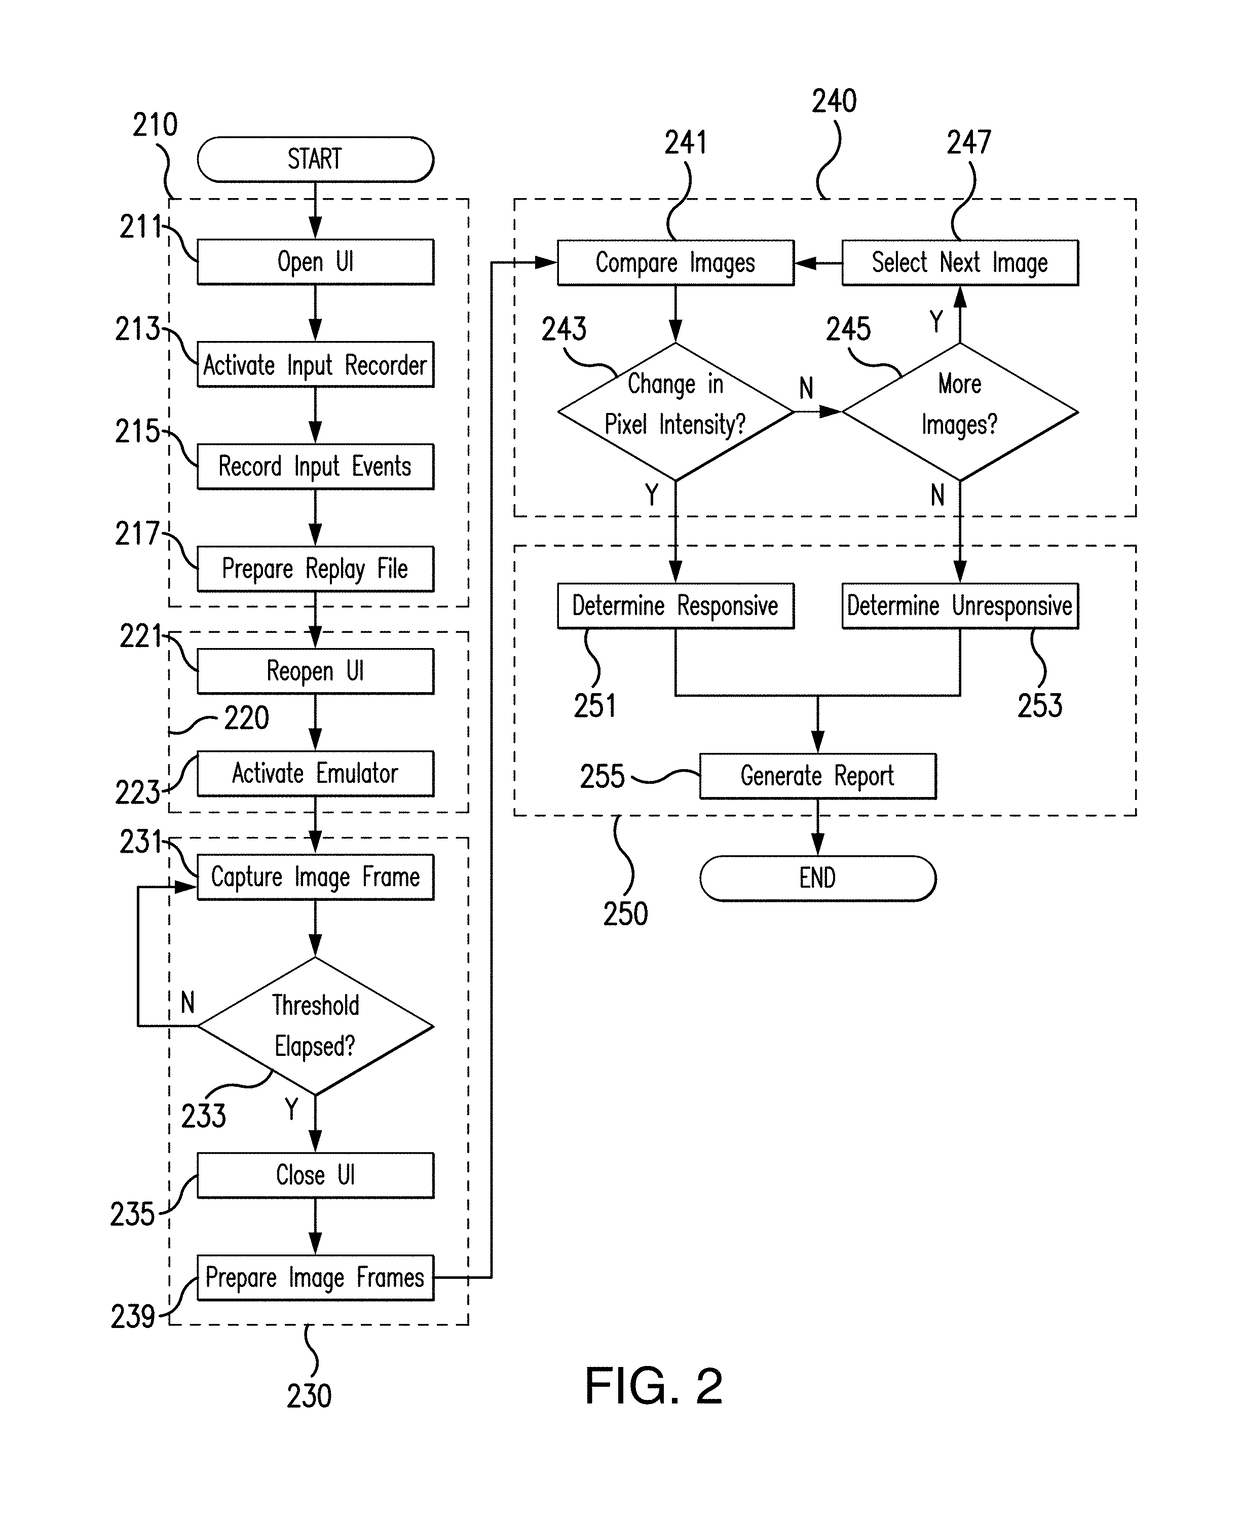 System and method for automated testing of user interface software for visual responsiveness